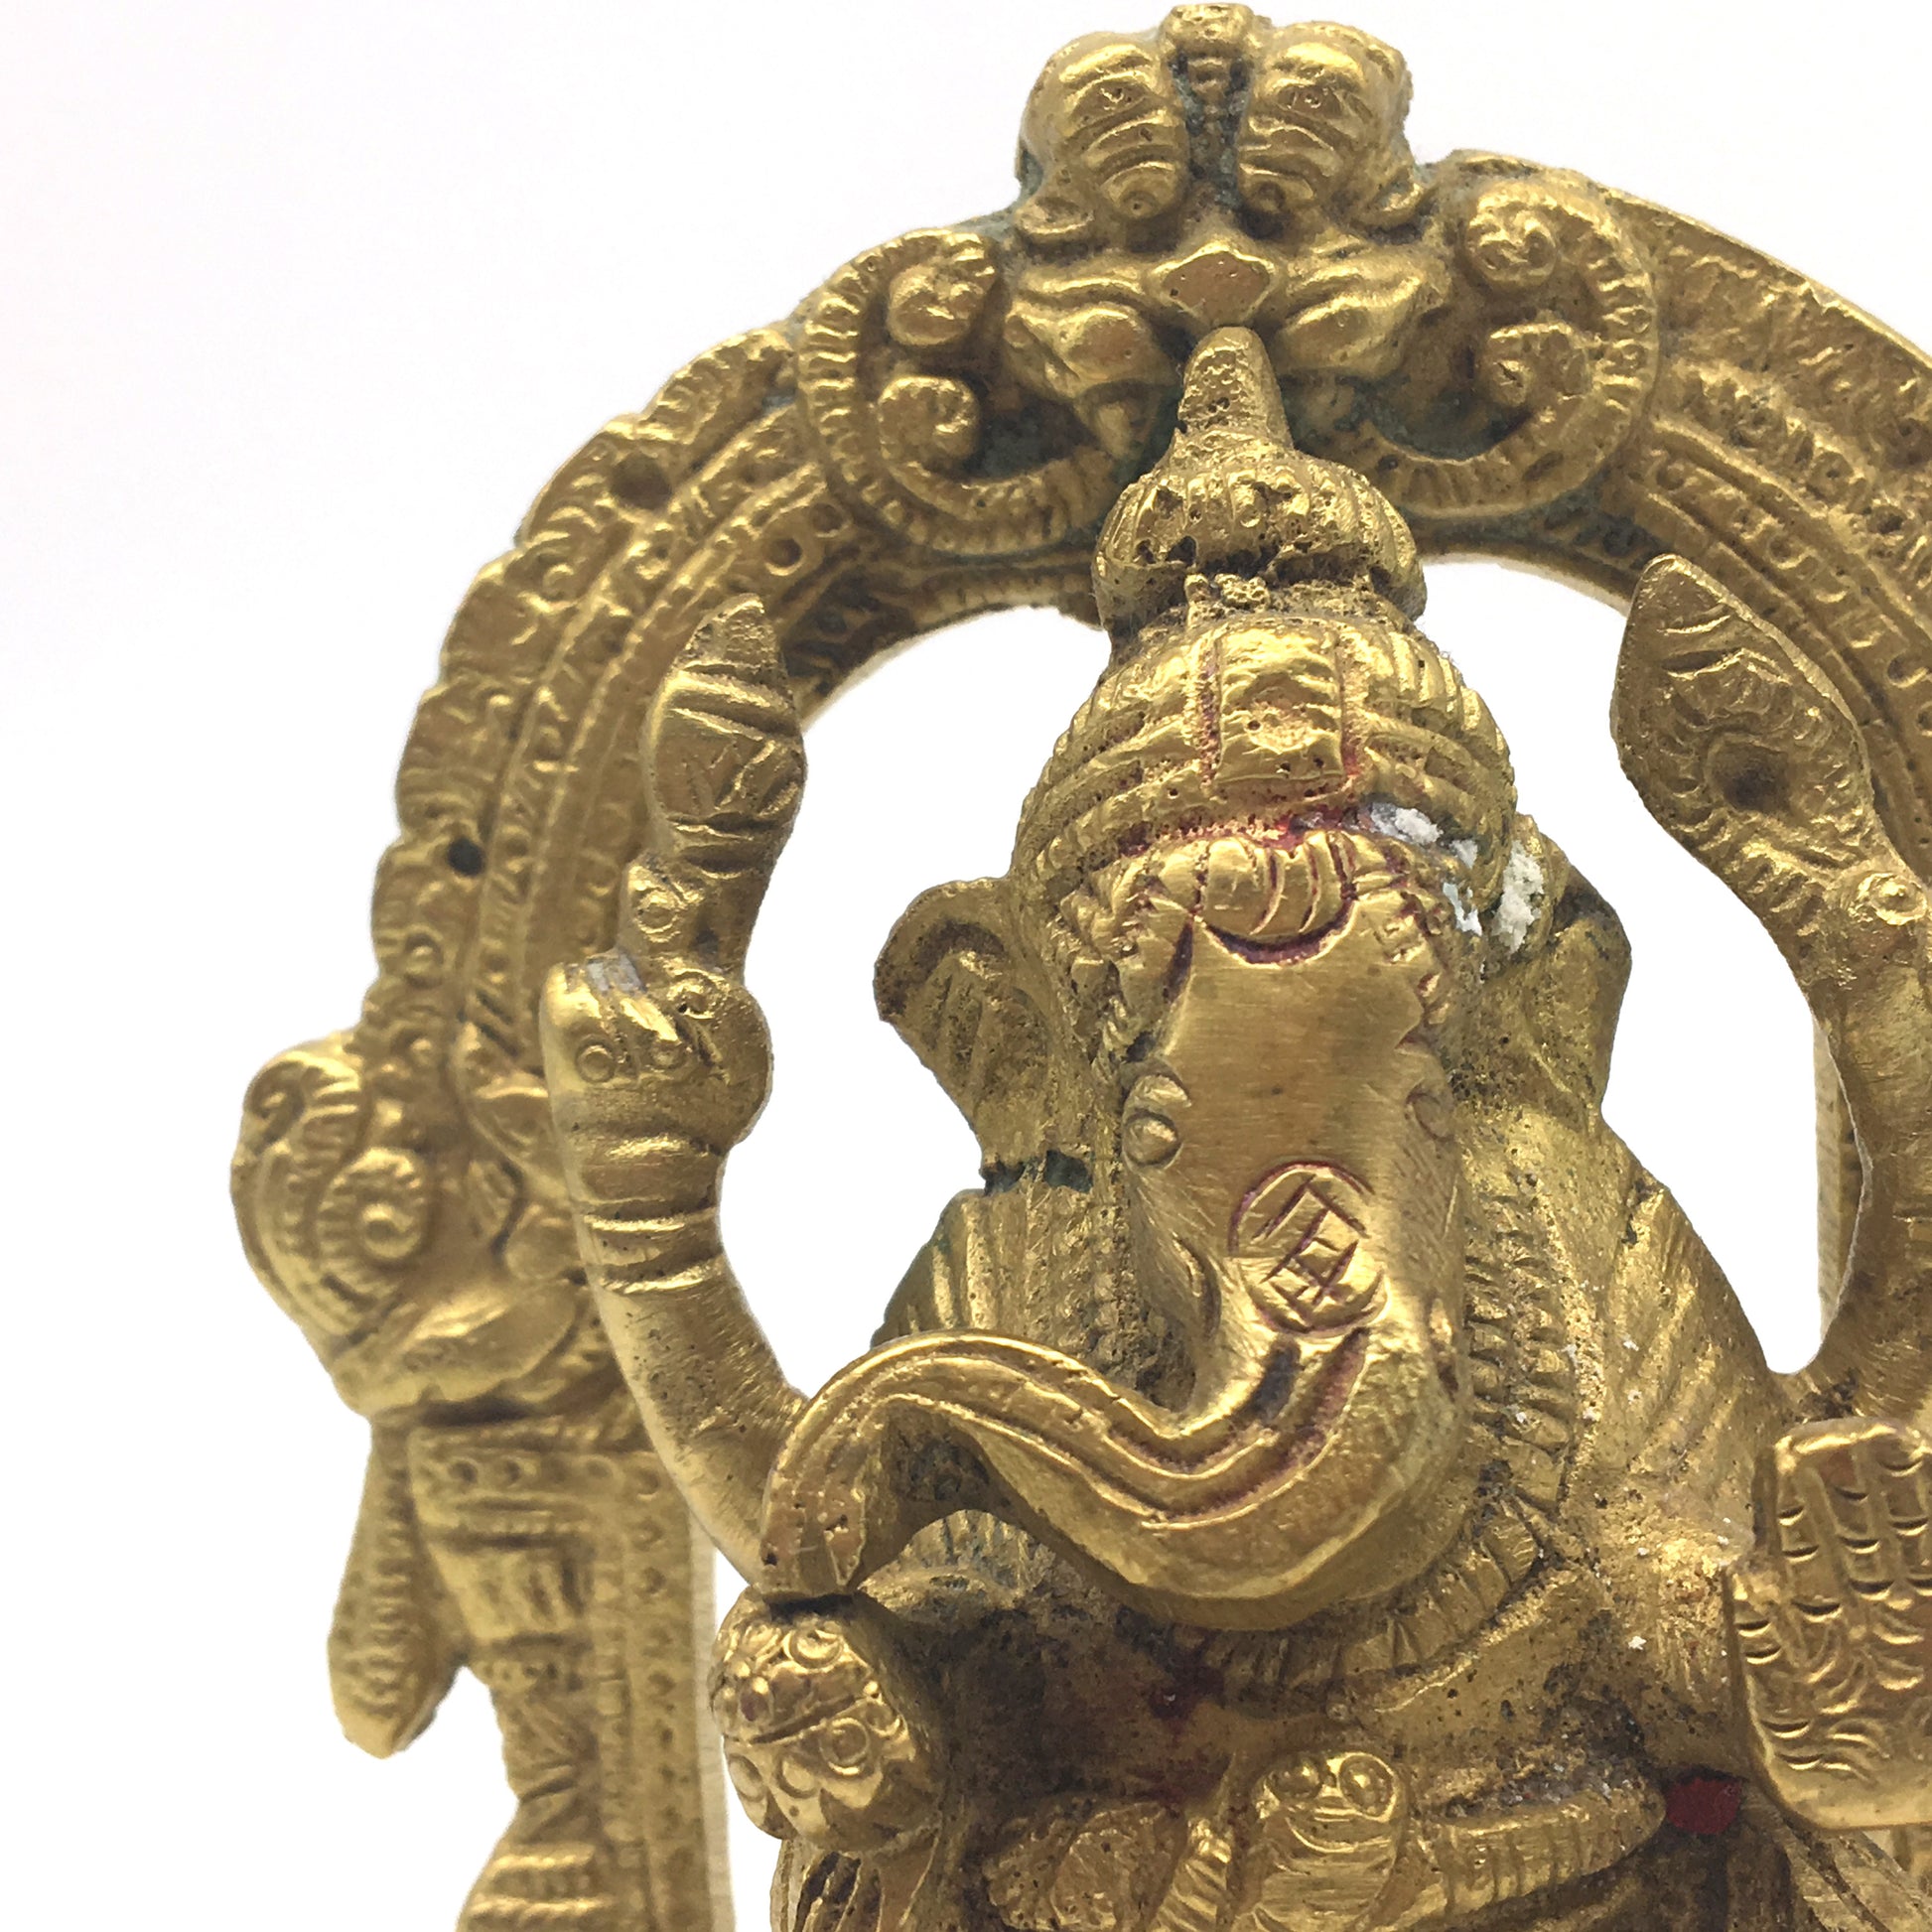 Handcrafted Brass Ganesh Ganapati India Elephant God Statue – Obstacle Remover - Montecinos Ethnic